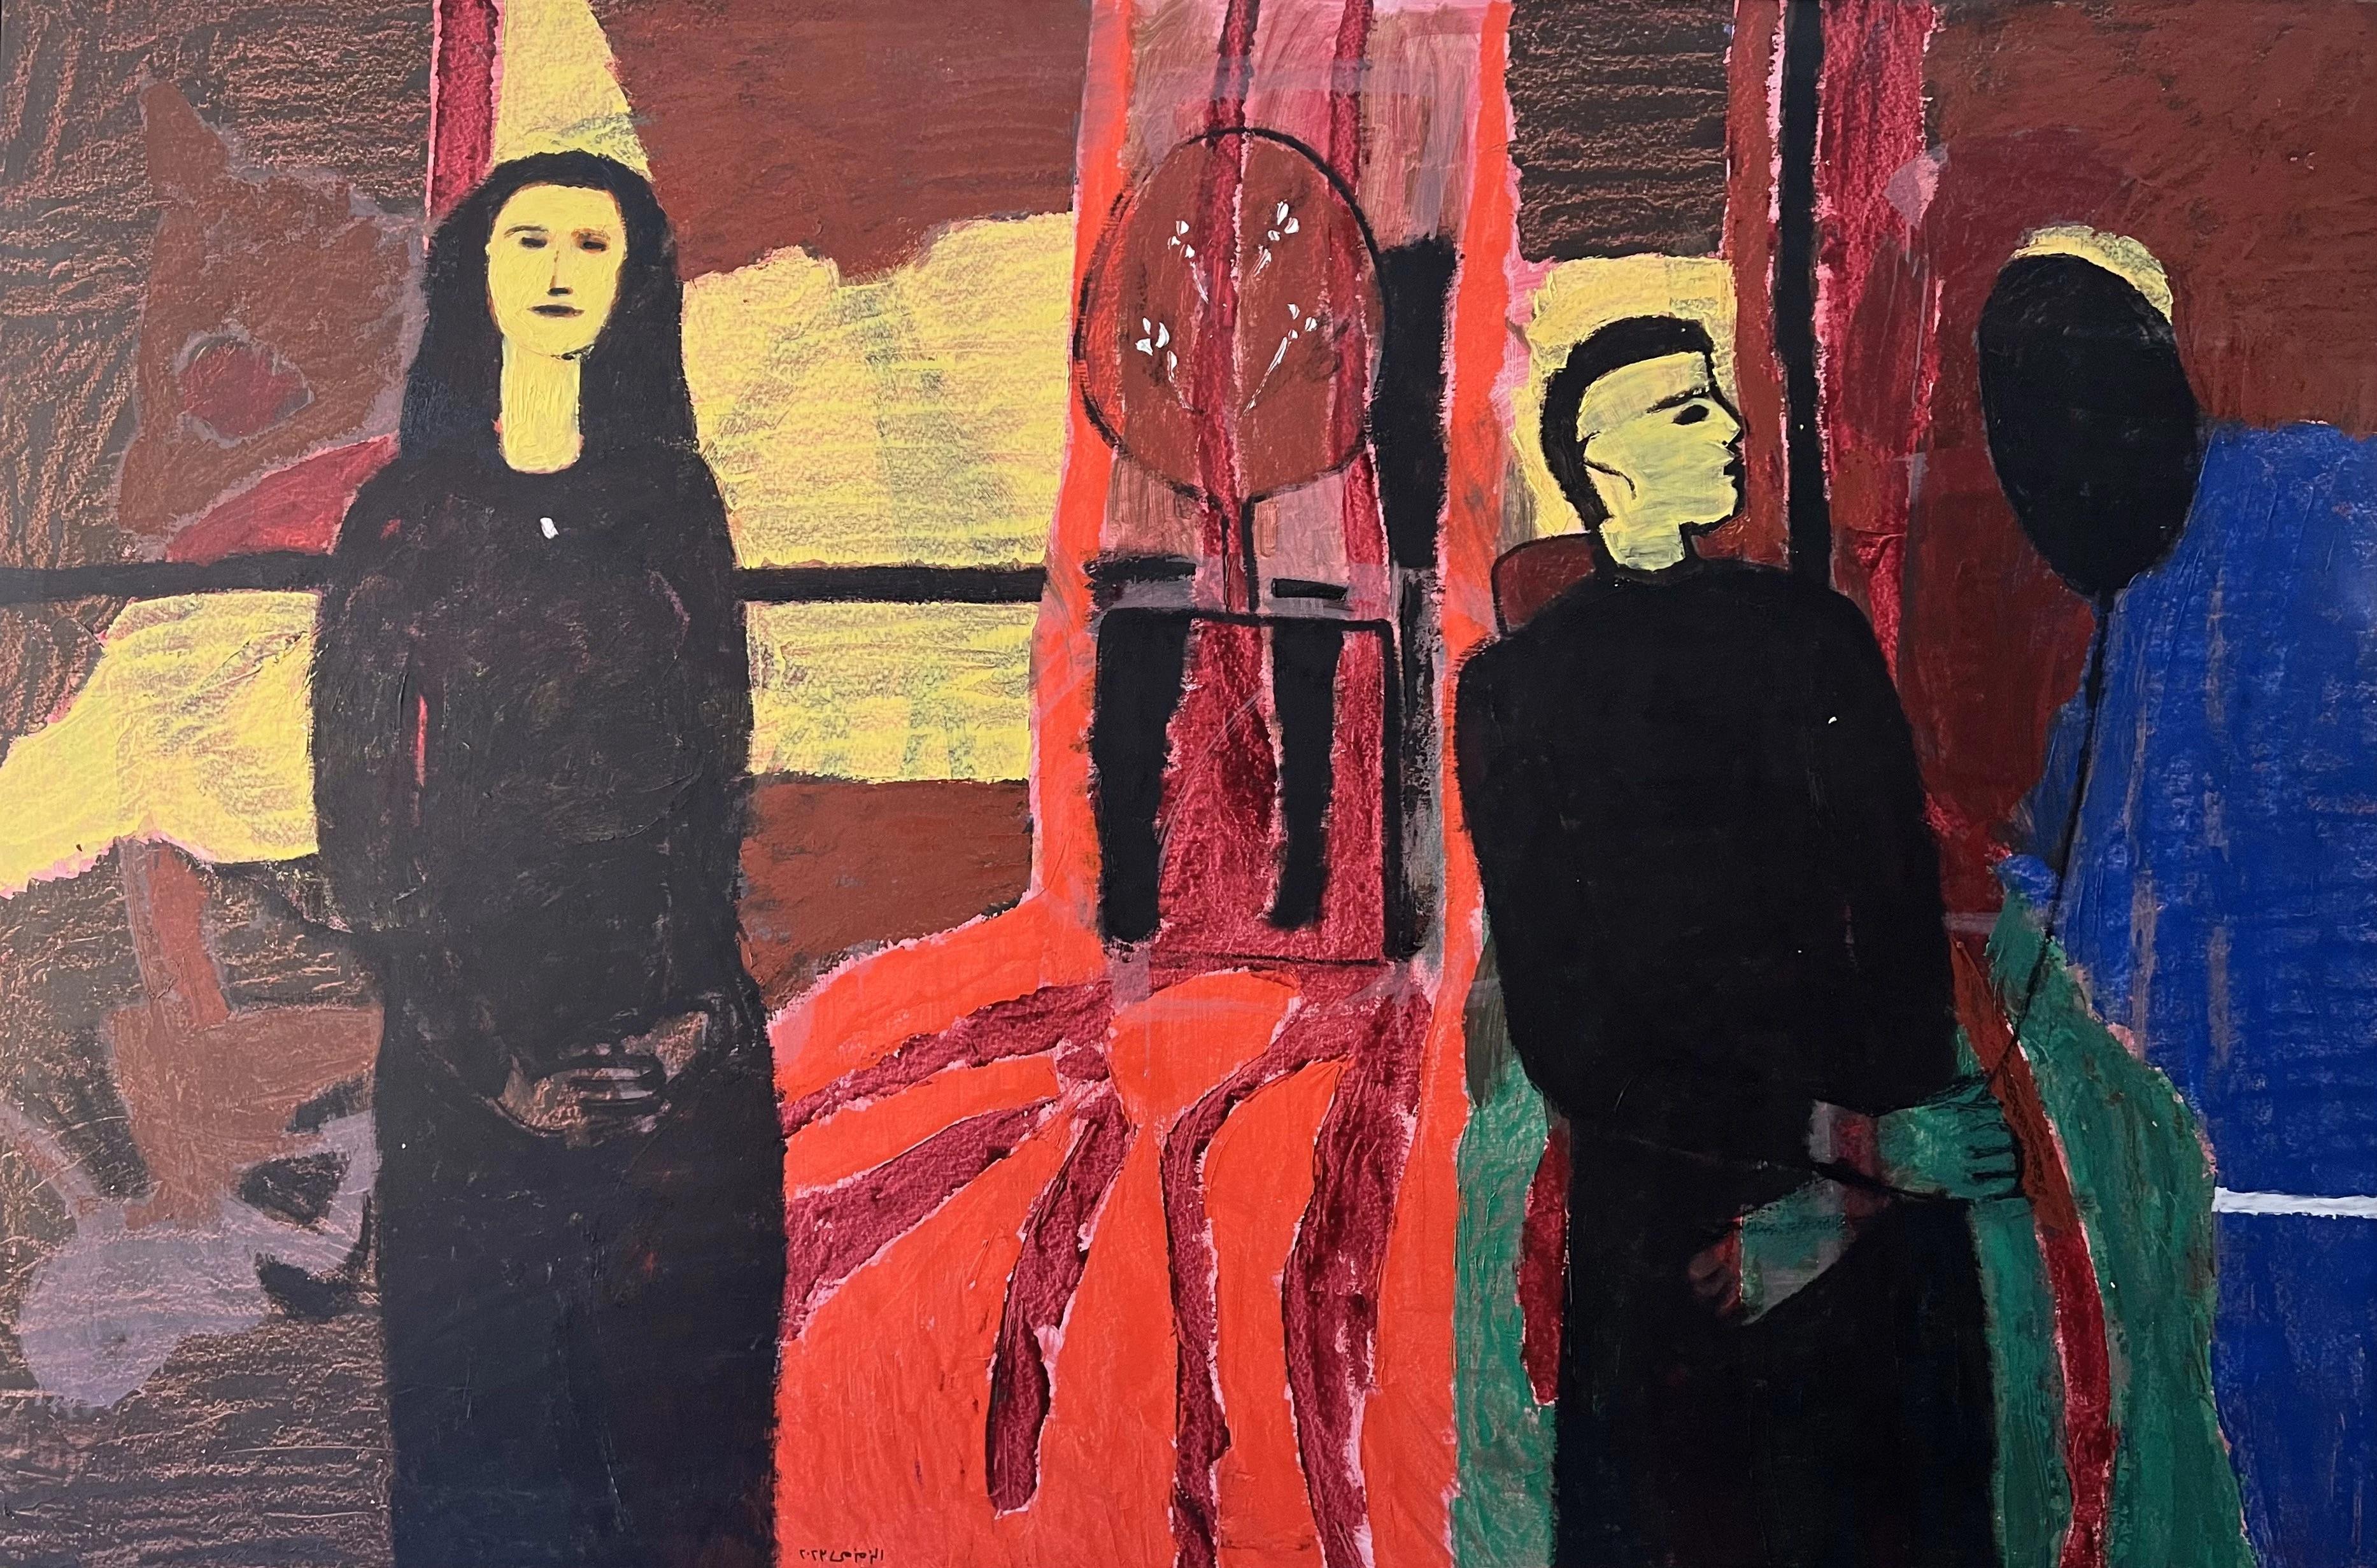 "Partnership" Abstract Oil Painting 54" x 81" inch by Ashraf Zamzami

Ashraf El Zamzami was a graduate of the Academy of Fine Arts in Minya, and he fast made a name for himself in the local art scene in the mid-1990s with his palpably naive yet